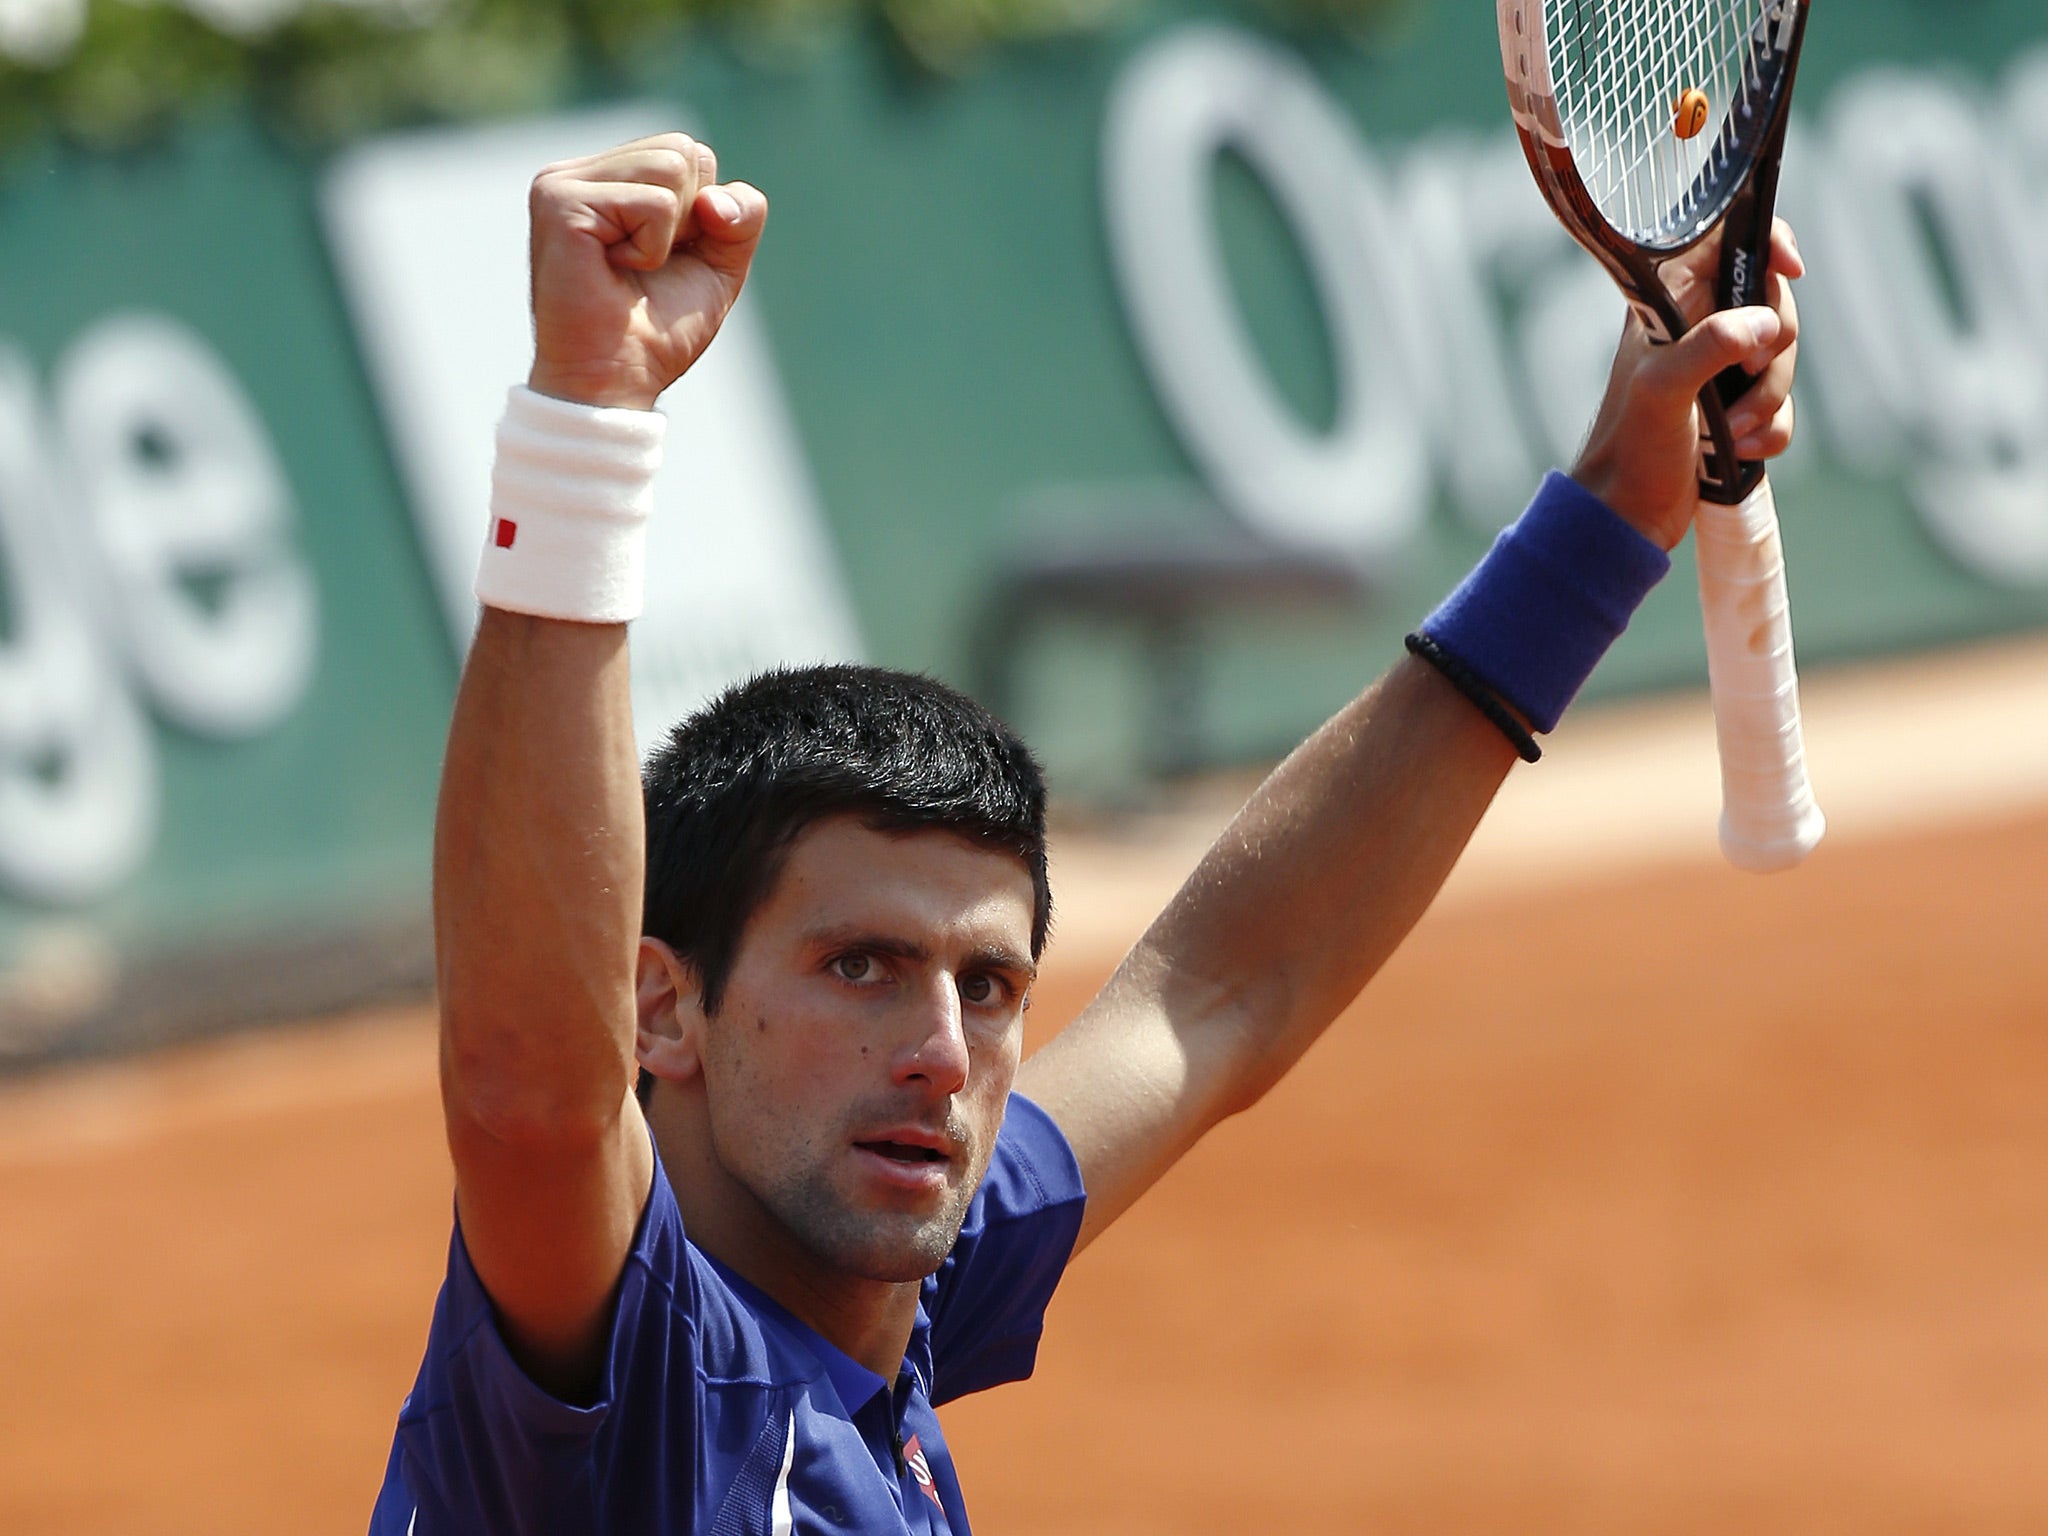 Serbia's Novak Djokovic celebrates his victory over Germany's Philipp Kohlschreiber at the end of their French Tennis Open round of sixteen match at the Roland Garros stadium in Paris